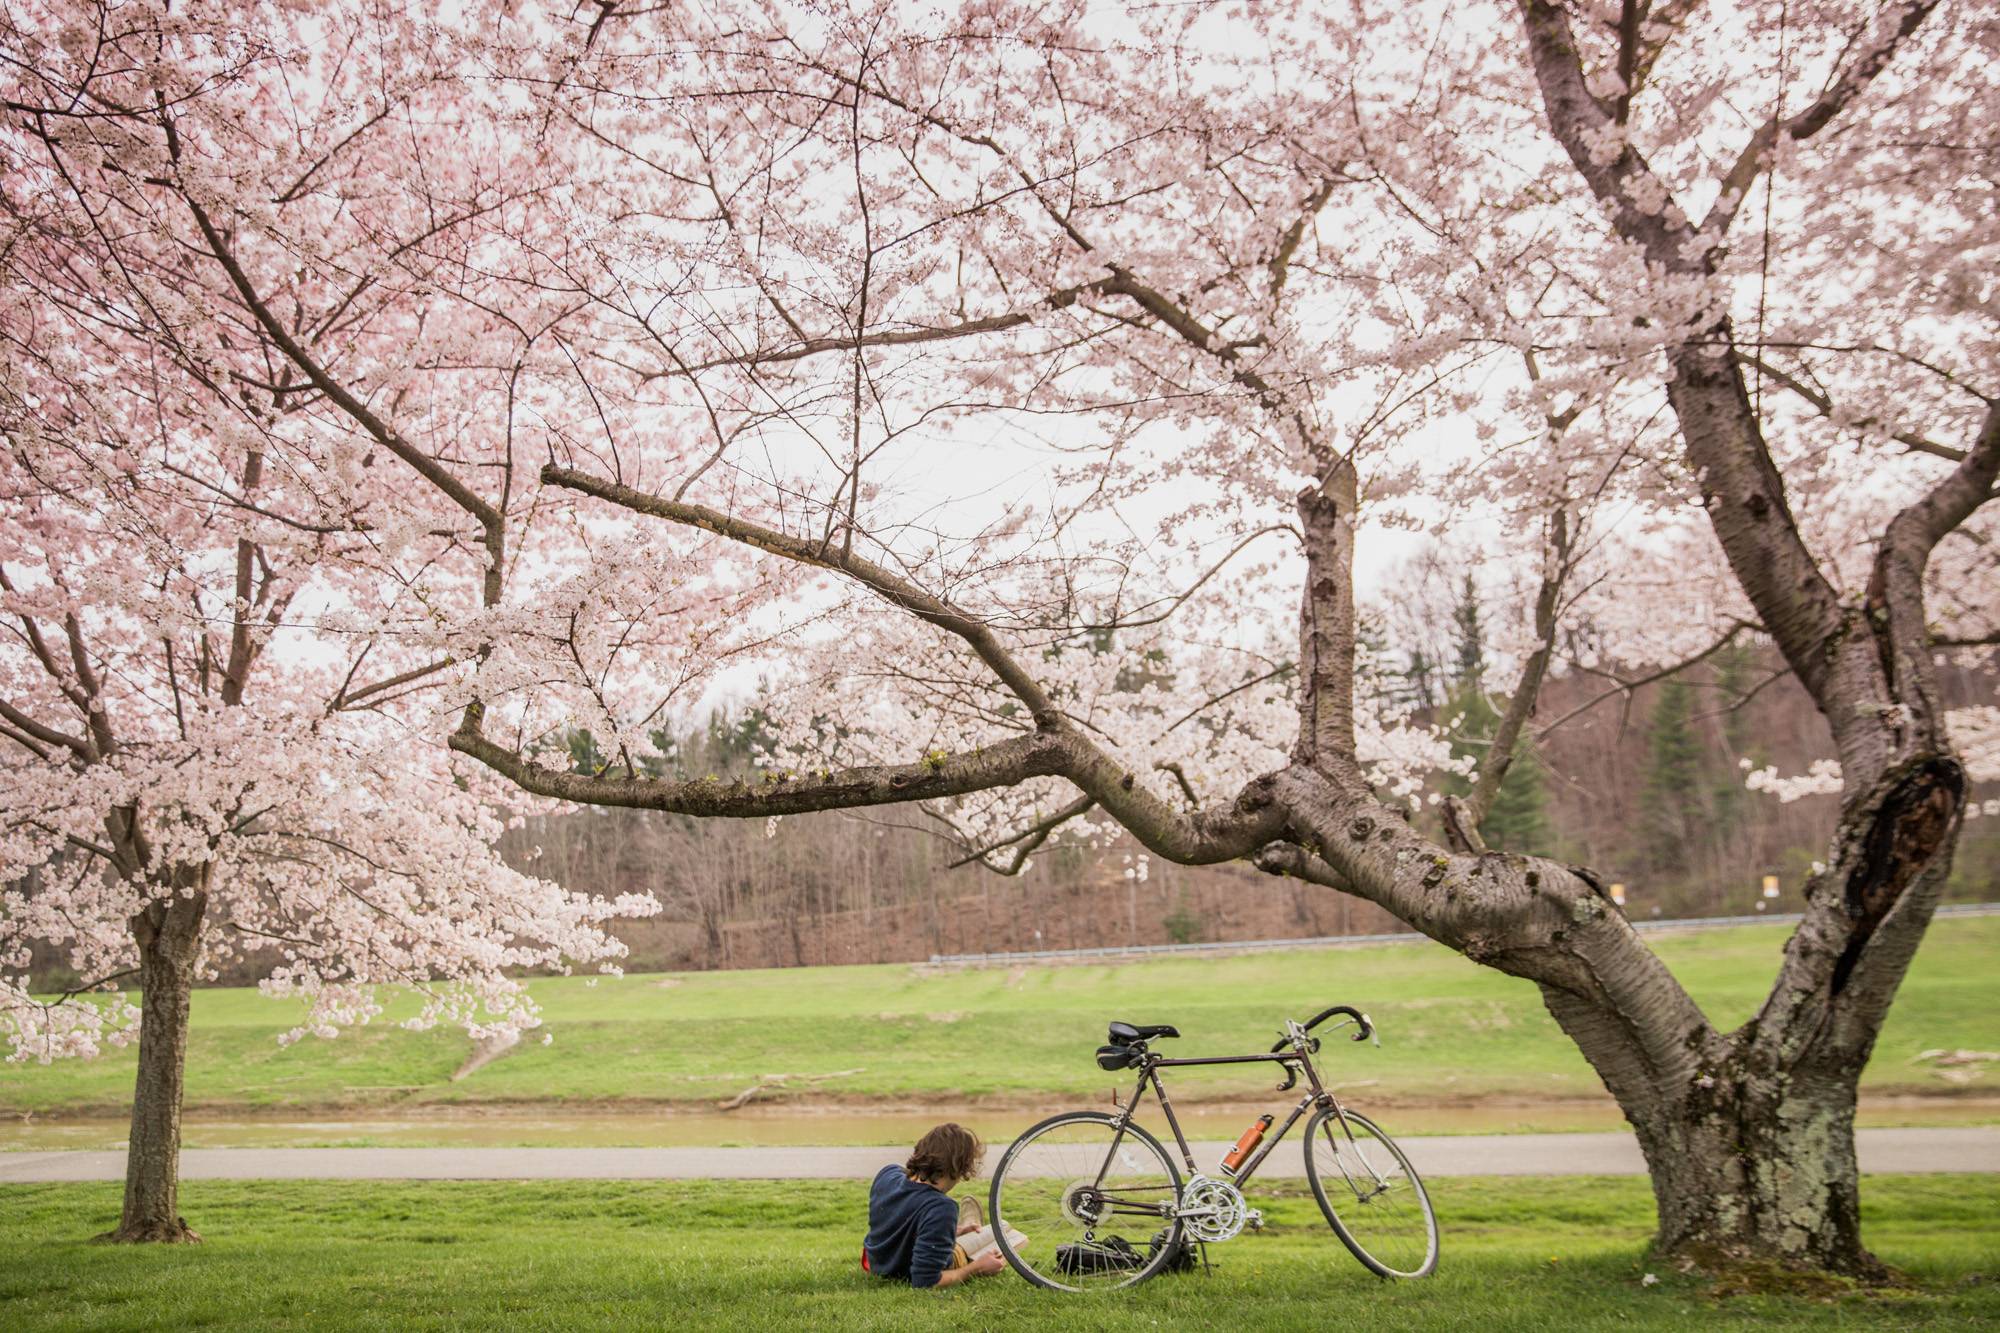 Cyclists stop to enjoy the blooming cherry blossoms along the banks of the Hocking River in Athens. 